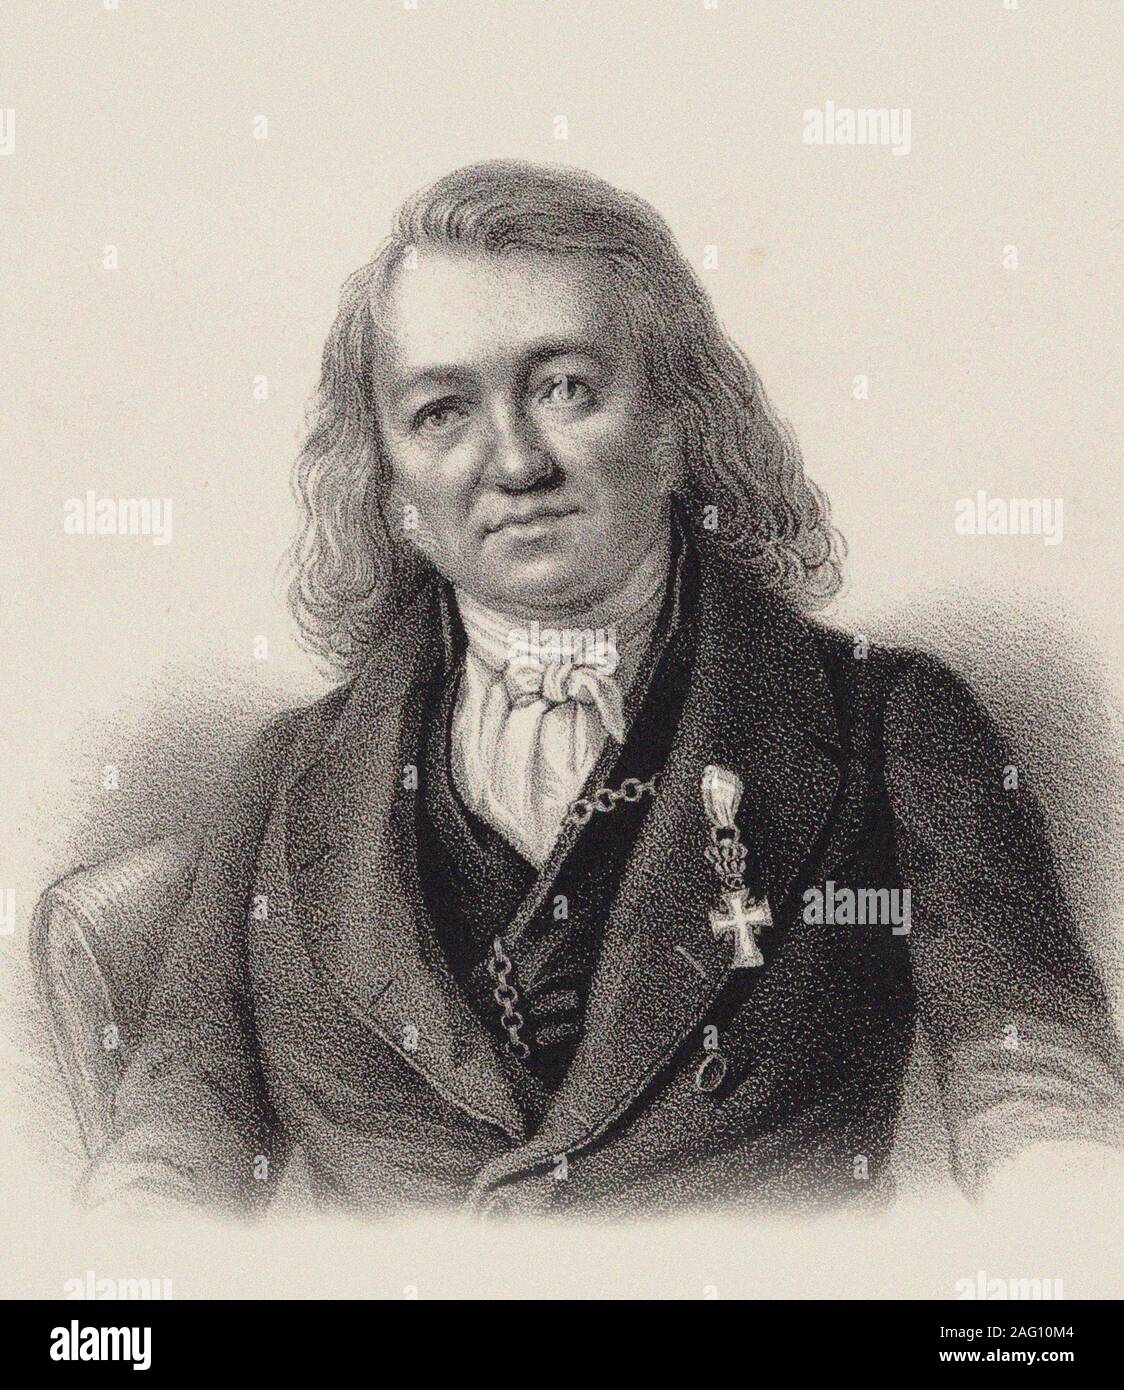 Portrait of the organist and composer Friedrich Schneider (1786-1853), c. 1840. Private Collection. Stock Photo